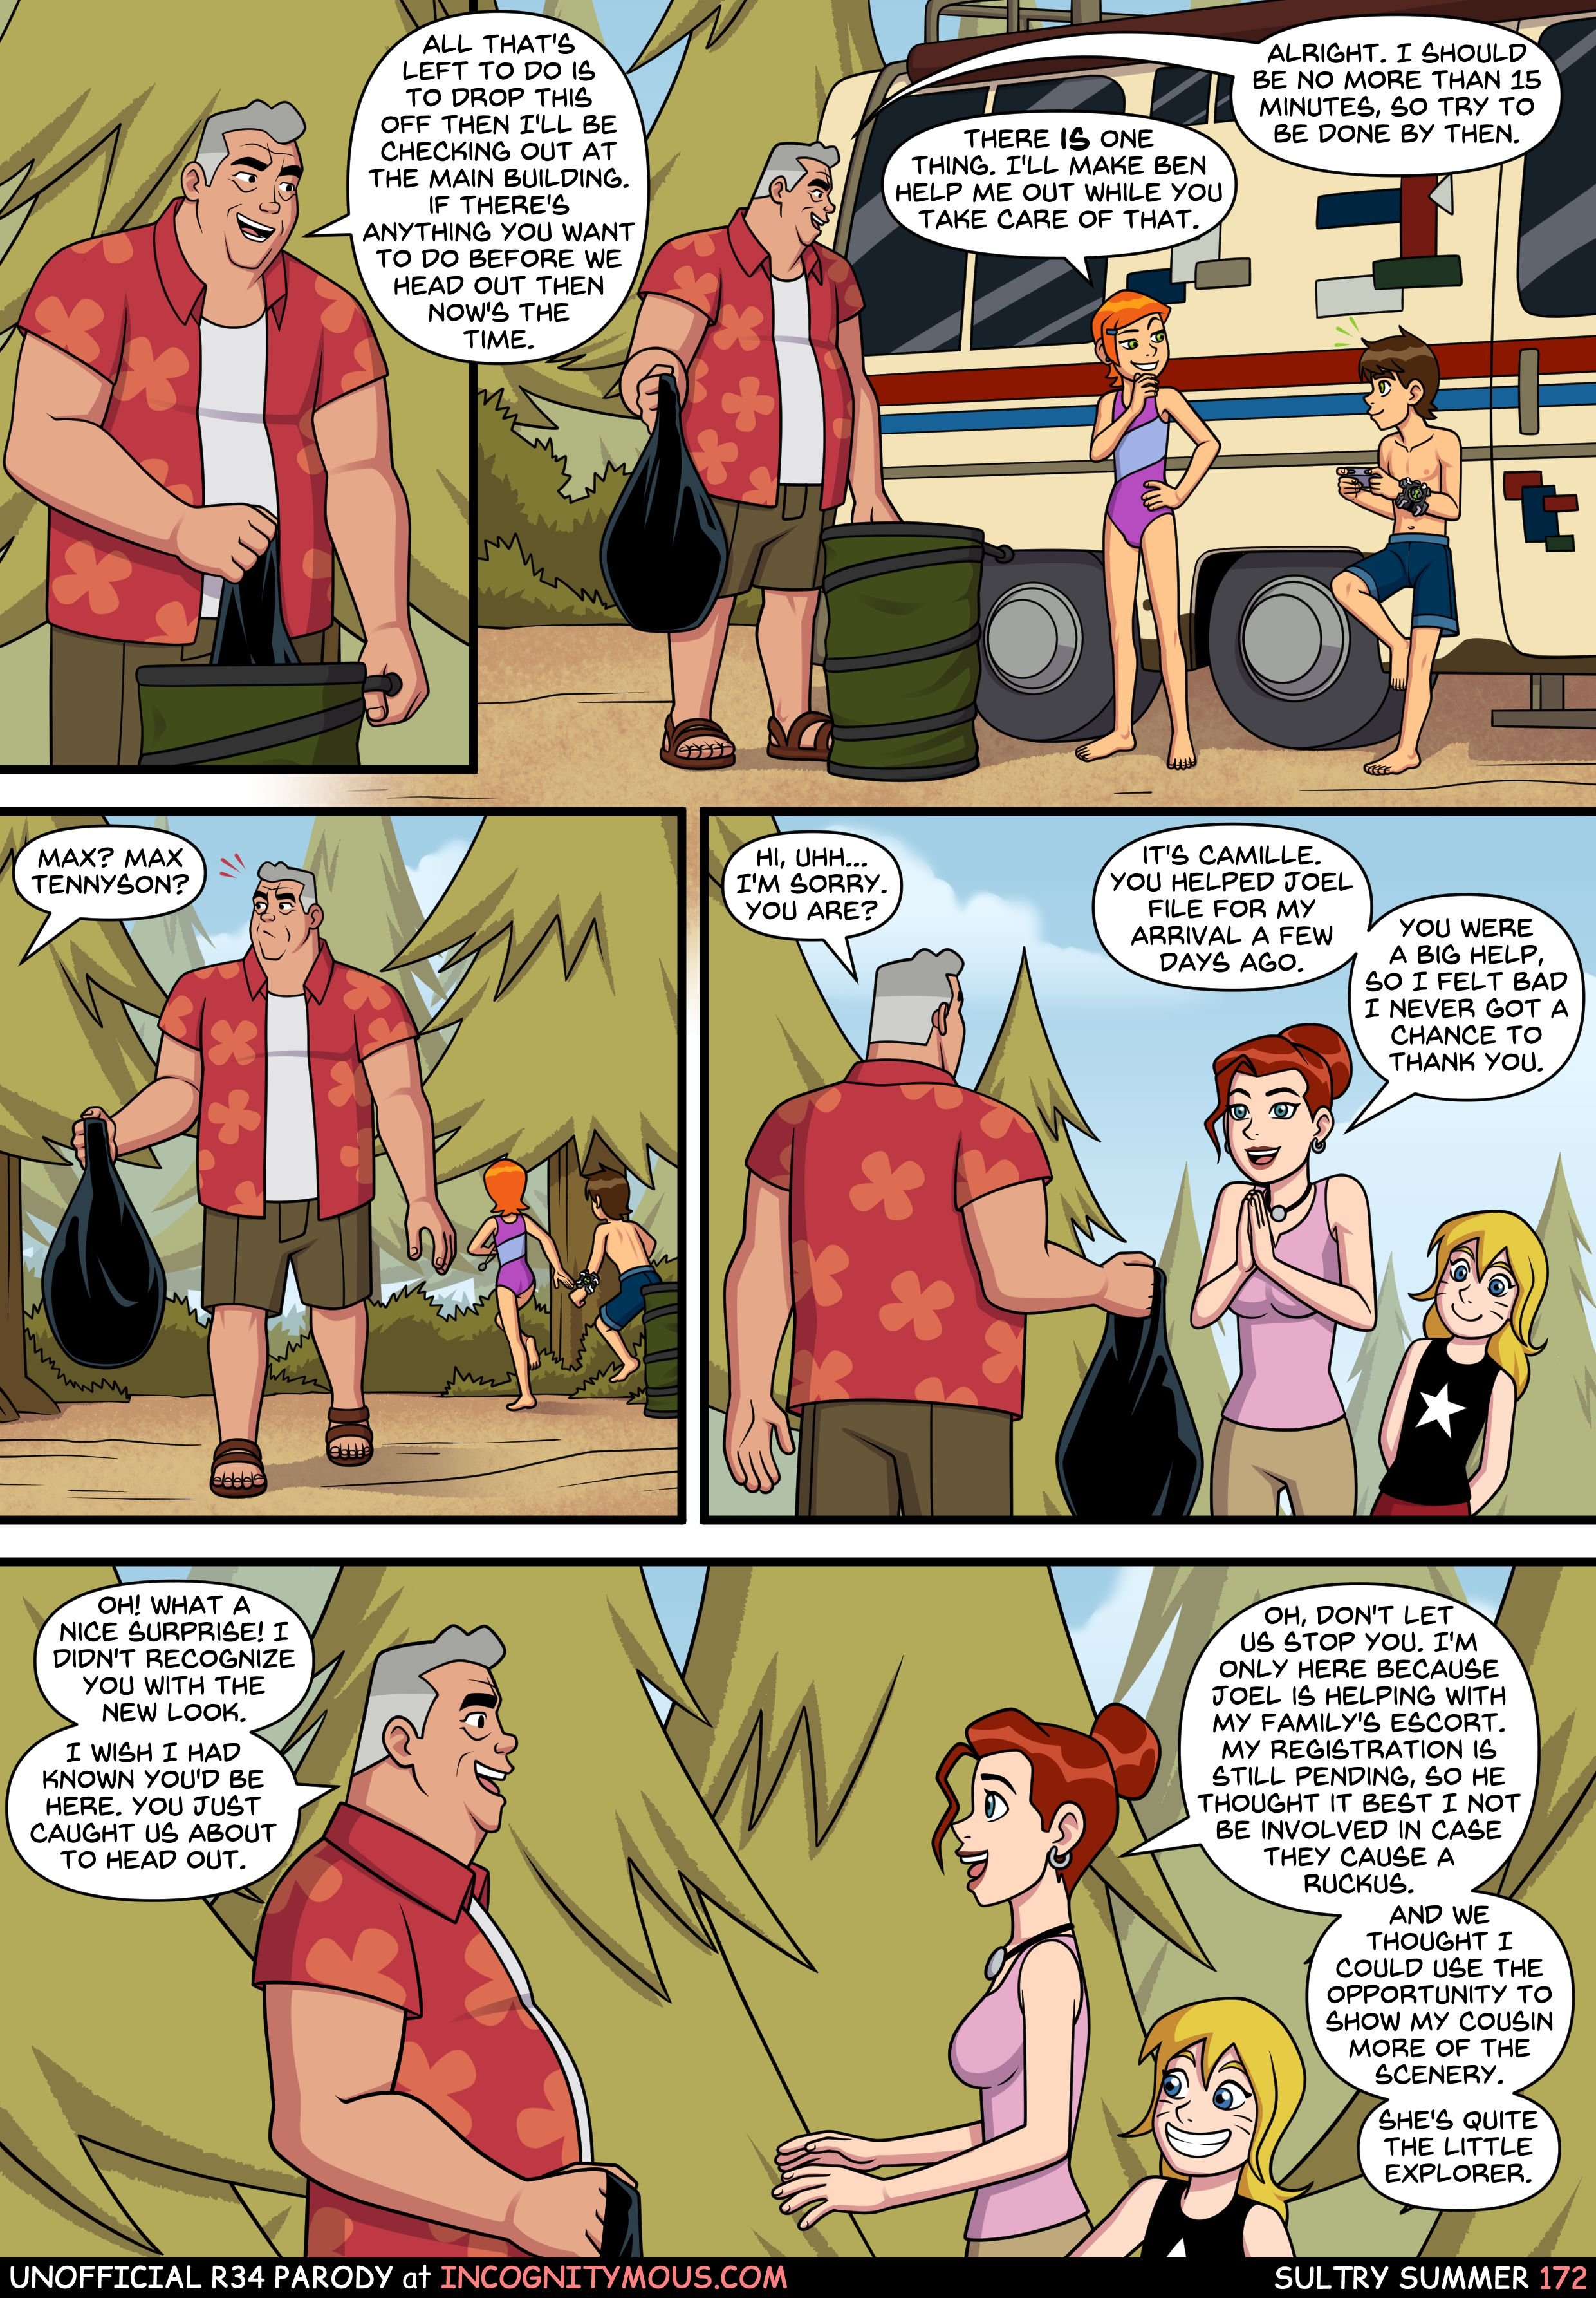 Sultry Summer (Ben 10) [Incognitymous] - 3 . Sultry Summer - Chapter 3 (Ben  10) [Incognitymous] - AllPornComic